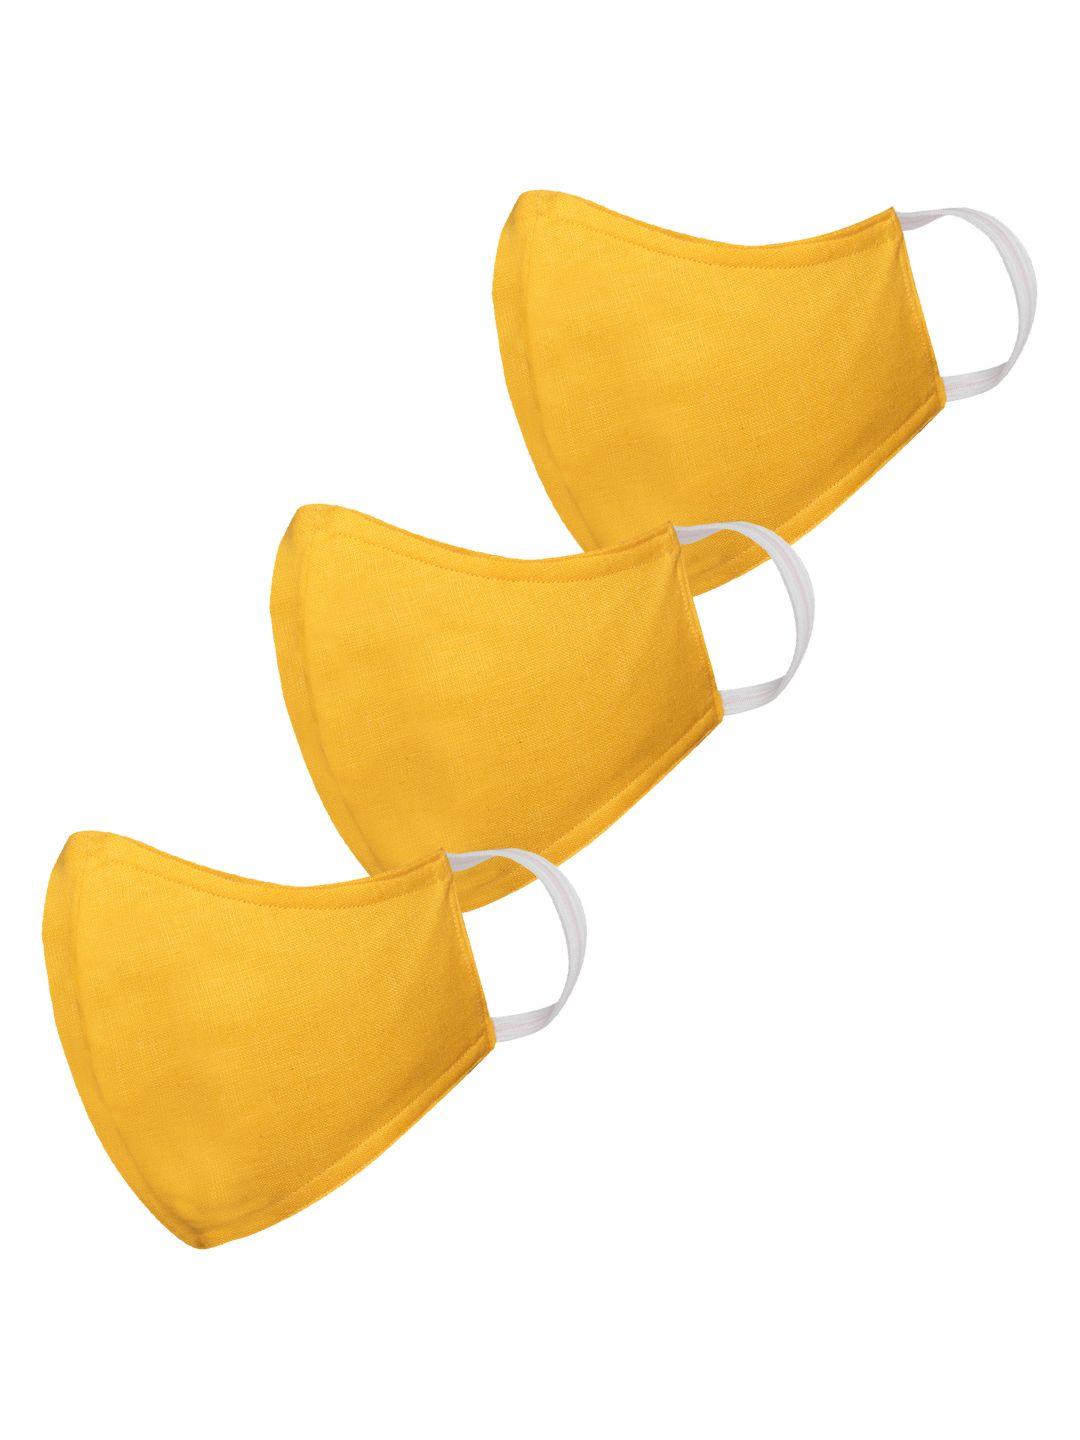 vastramay adults mustard yellow solid pack of 3 reusable 3-layer outdoor masks